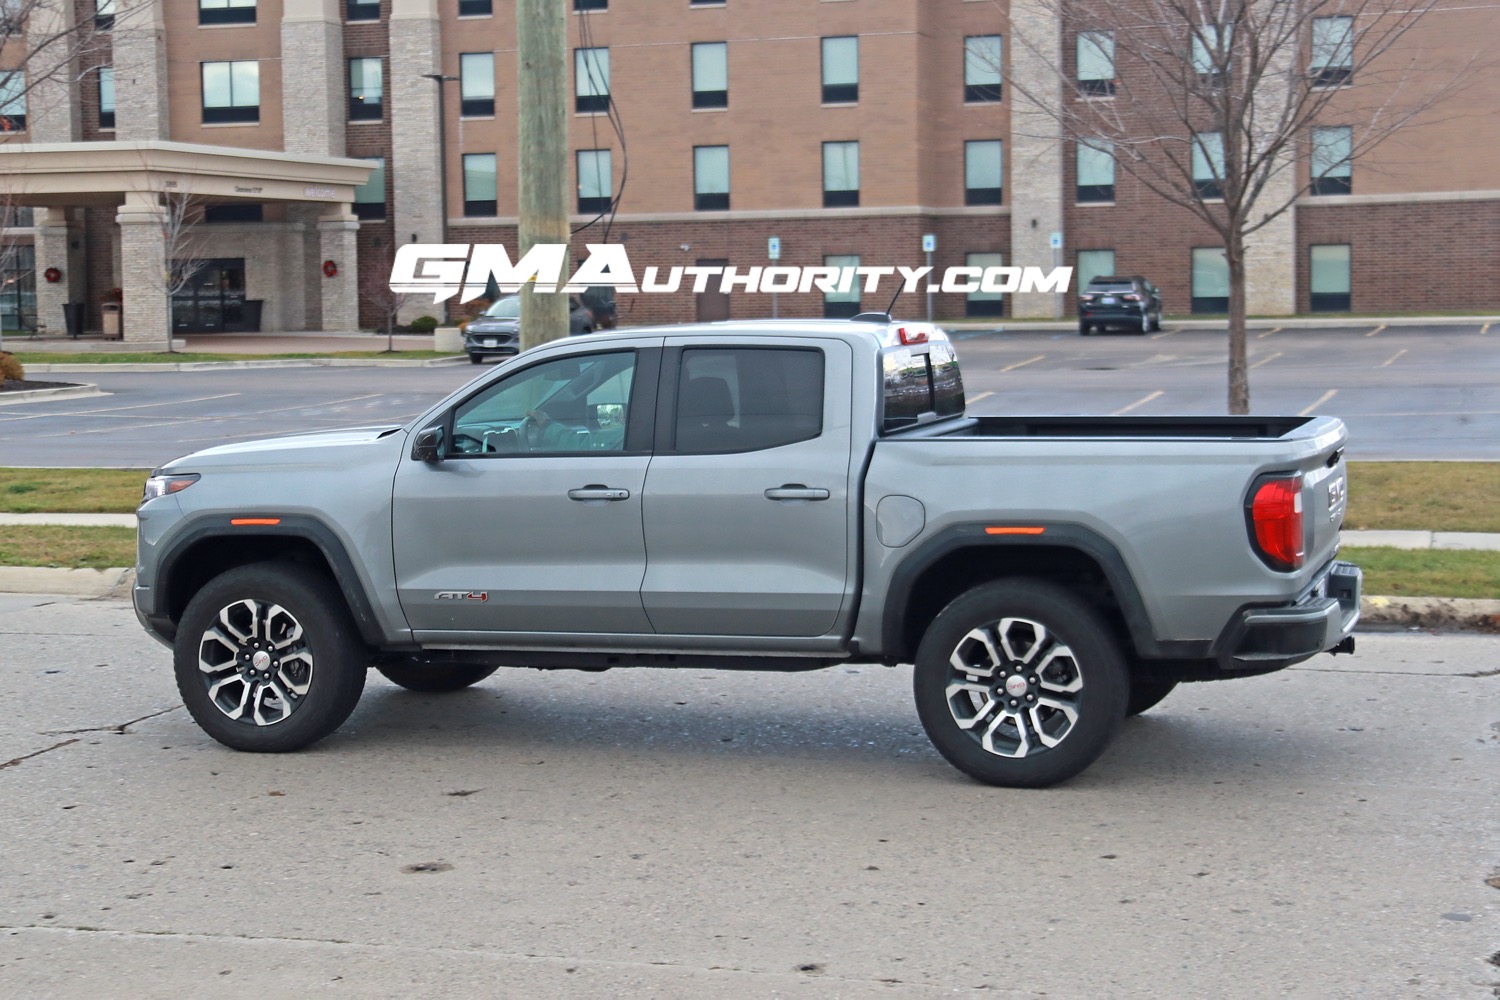 2023-gmc-canyon-at4-sterling-metallic-gxd-20-inch-wheels-rd5-real-world-photos-exterior3-chevrolet-colorado-trail-boss-sterling-gray-metallic-gxd-first-real-world-photos-exterior-006